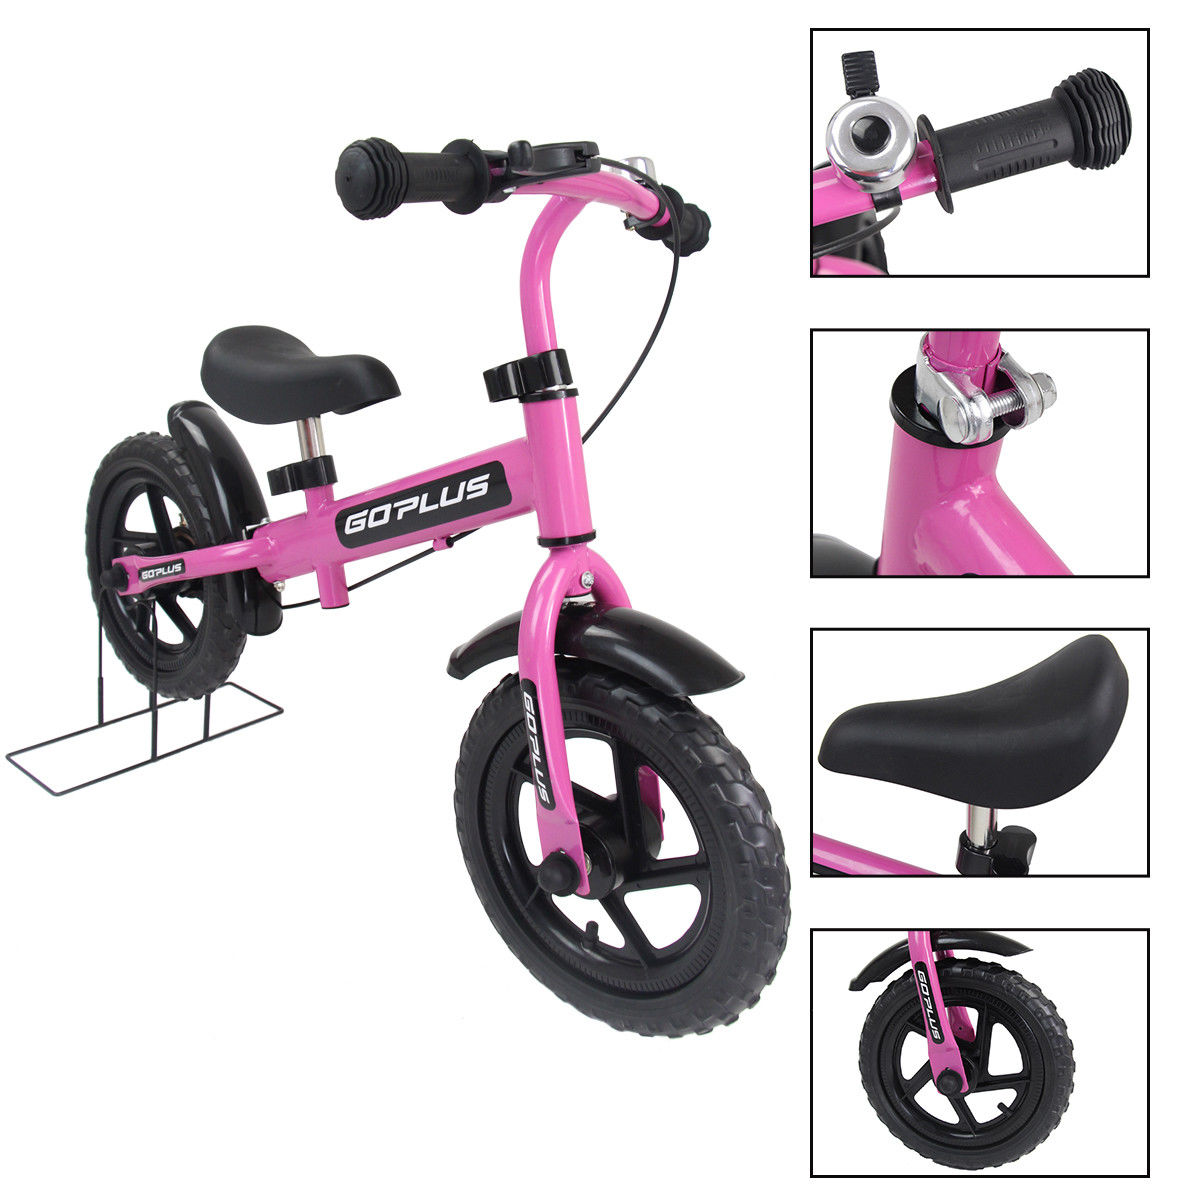 Goplus 12'' Pink Kids Balance Bike Children Boys & Girls with Brakes and Bell Exercise - image 1 of 9